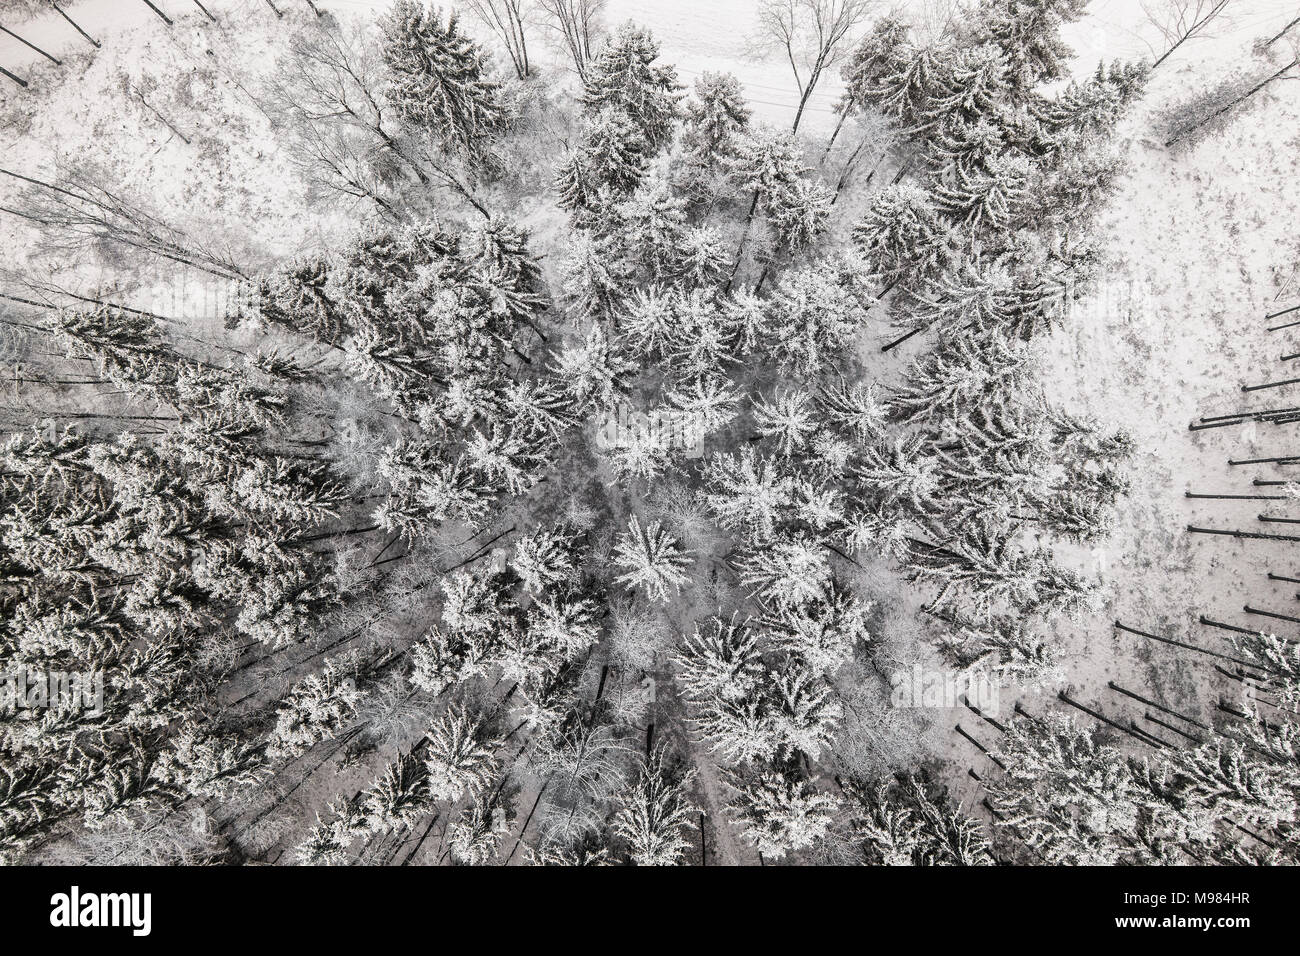 Germany, Bavaria, Conifers in winter from above Stock Photo